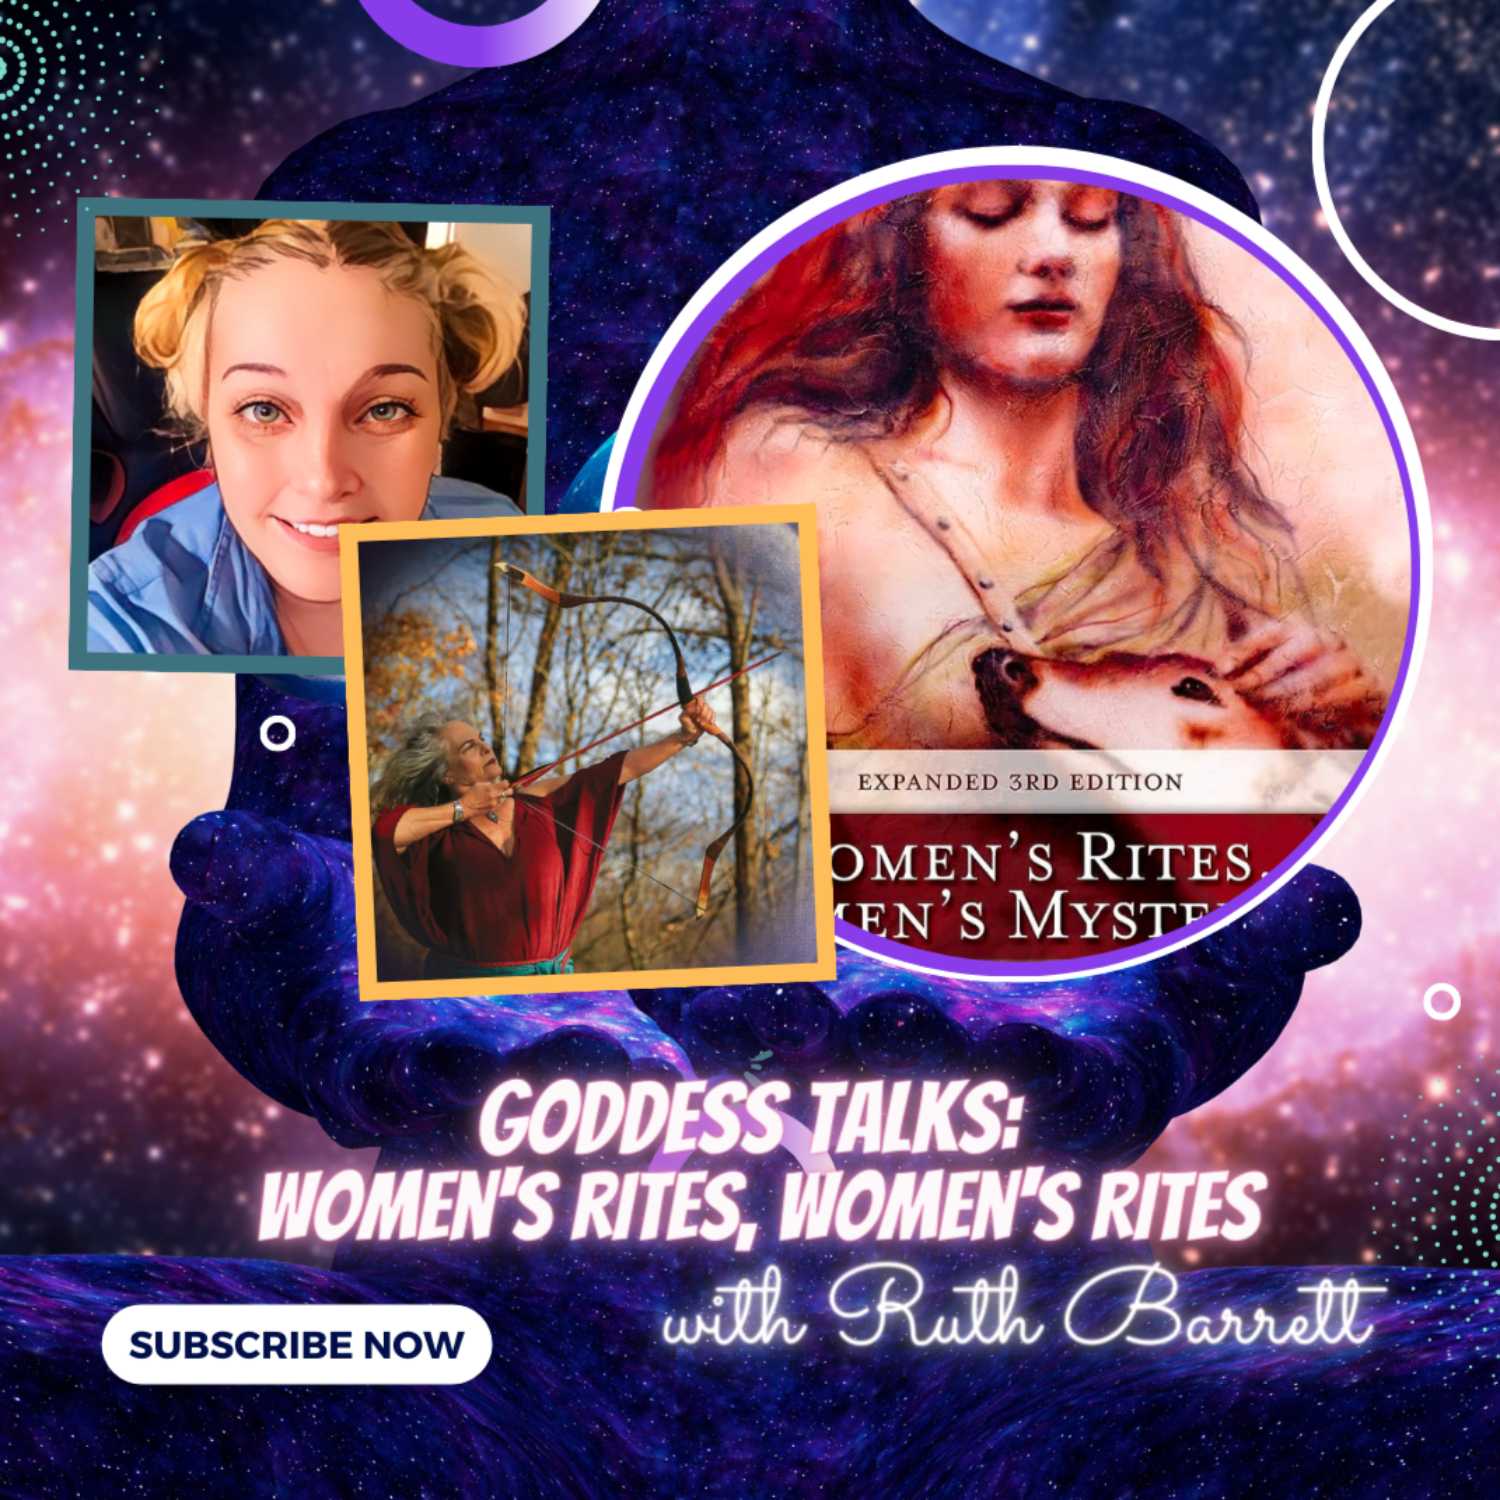 GODDESS TALKS: Dianic Wicca and Women's Rites - with Ruth Barrett